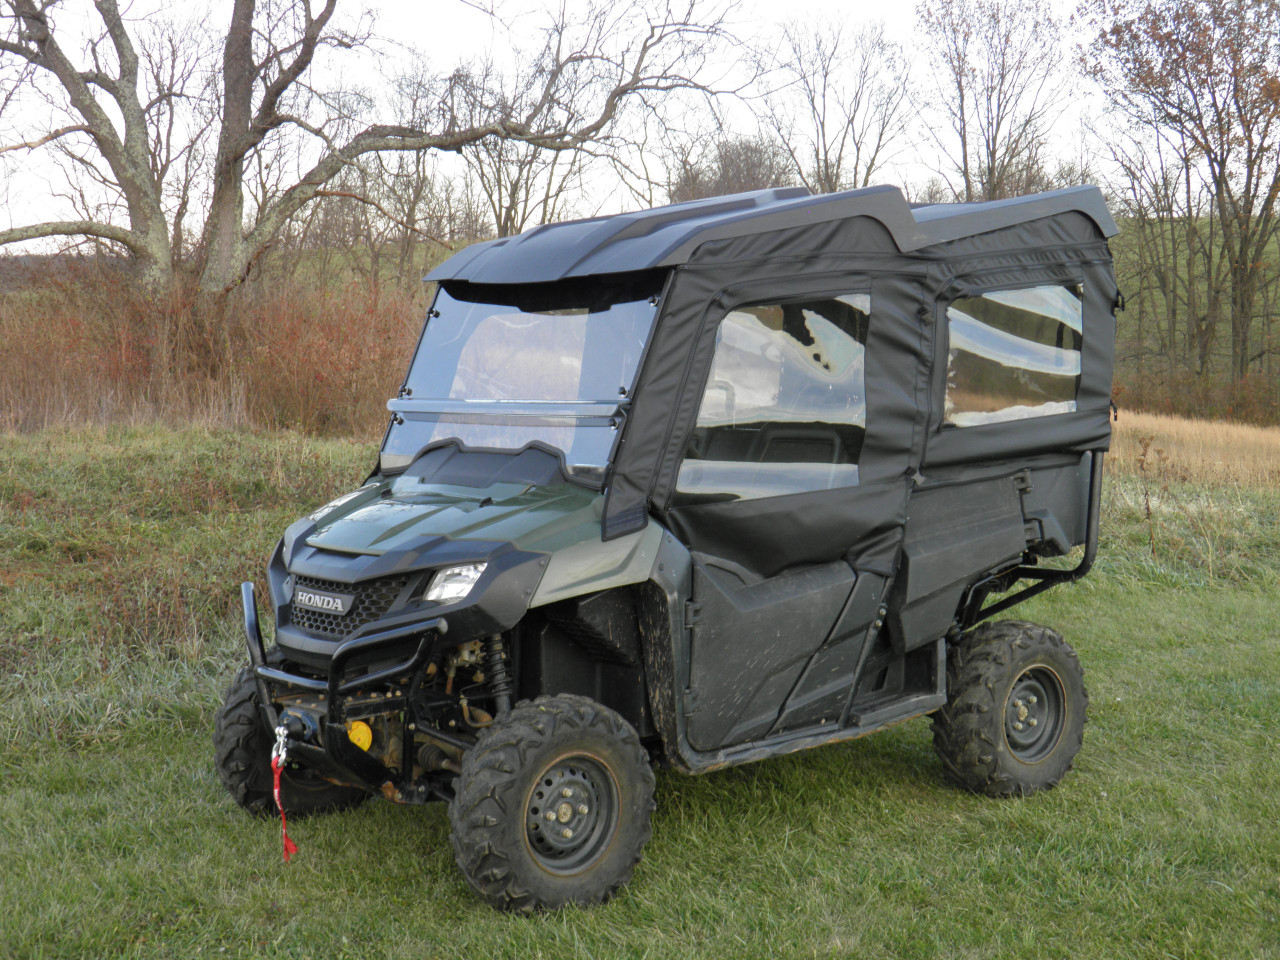 3 Star side x side Honda Pioneer 700-4 full cab enclosure front and side angle view